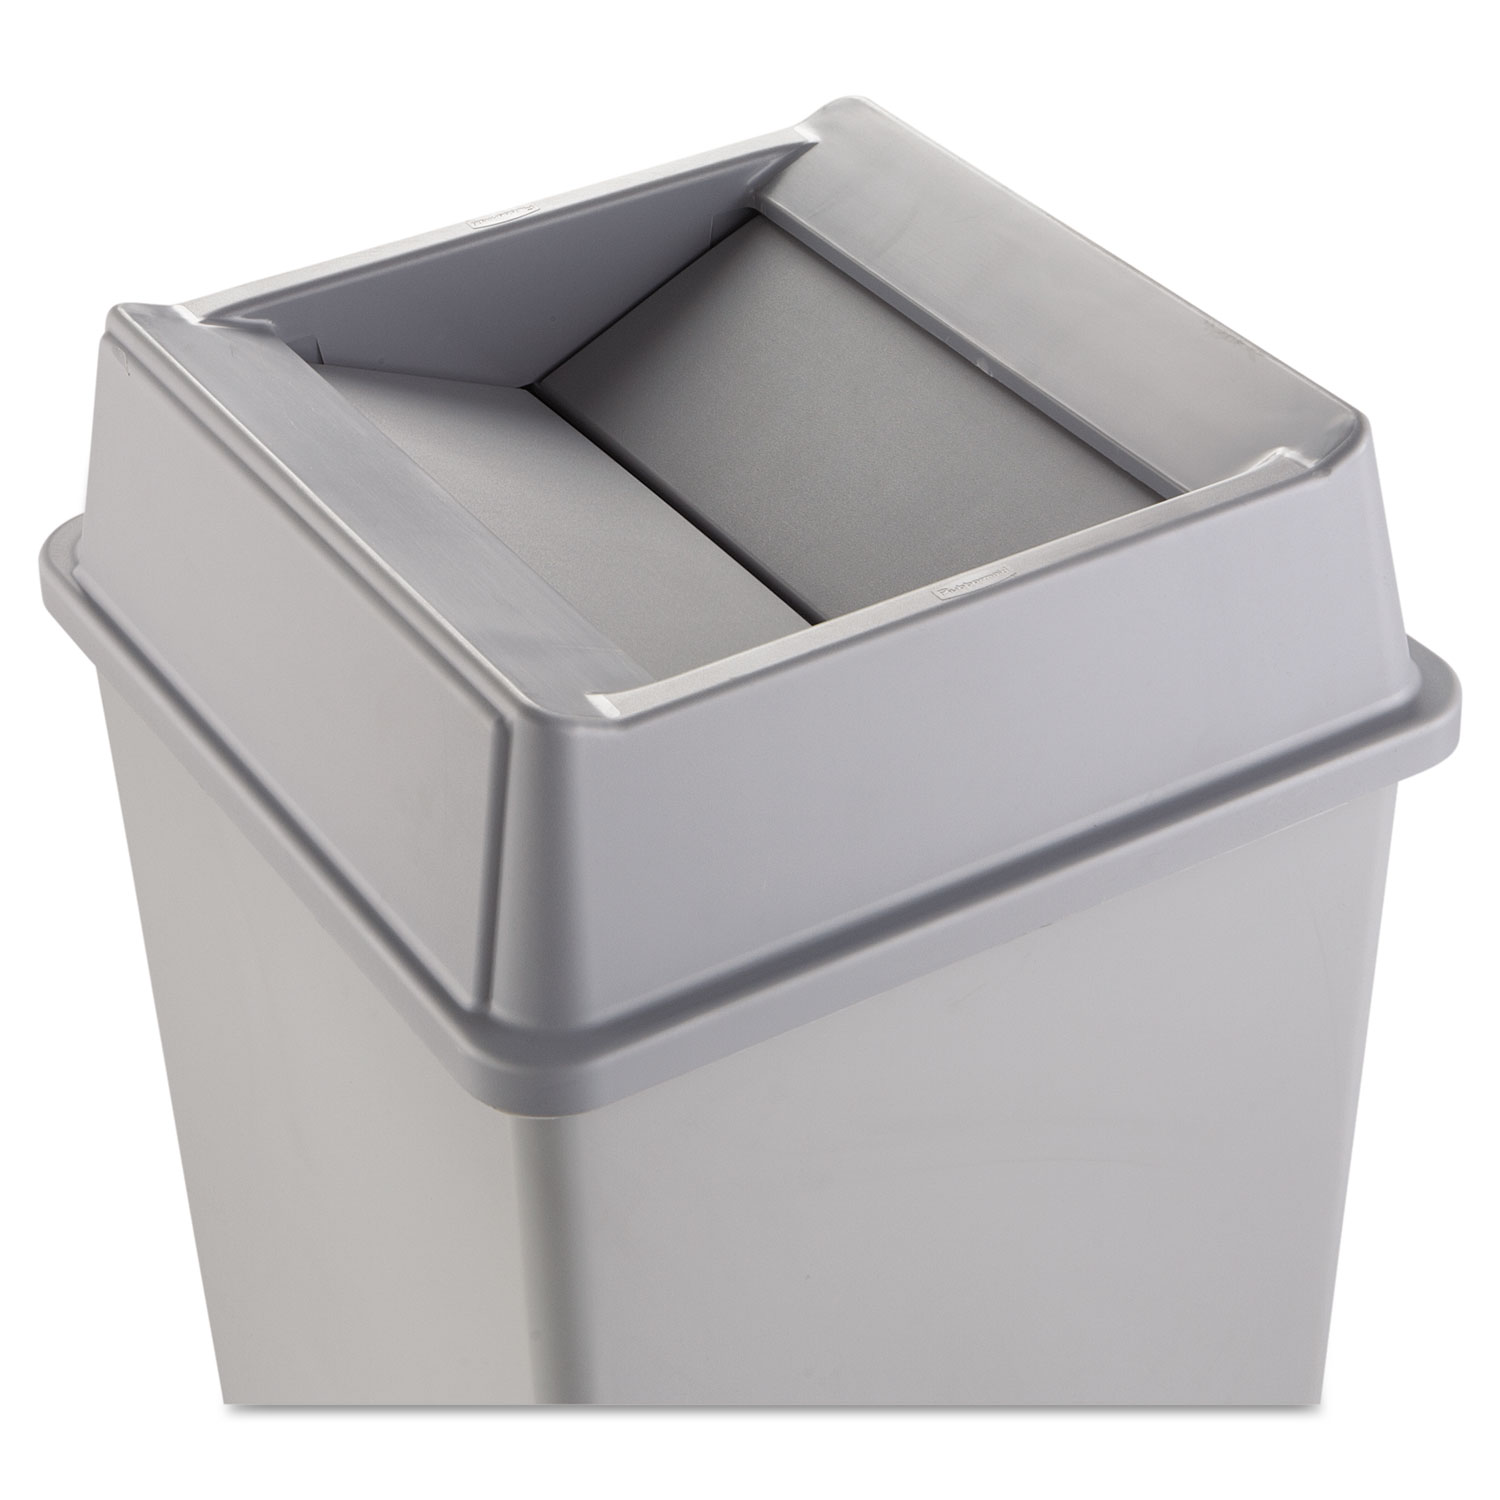  Rubbermaid Commercial FG266400GRAY Untouchable Square Swing Top Lid, Plastic, 20.13w x 20.13d x 6.25h, Gray (RCP2664GRAY) 